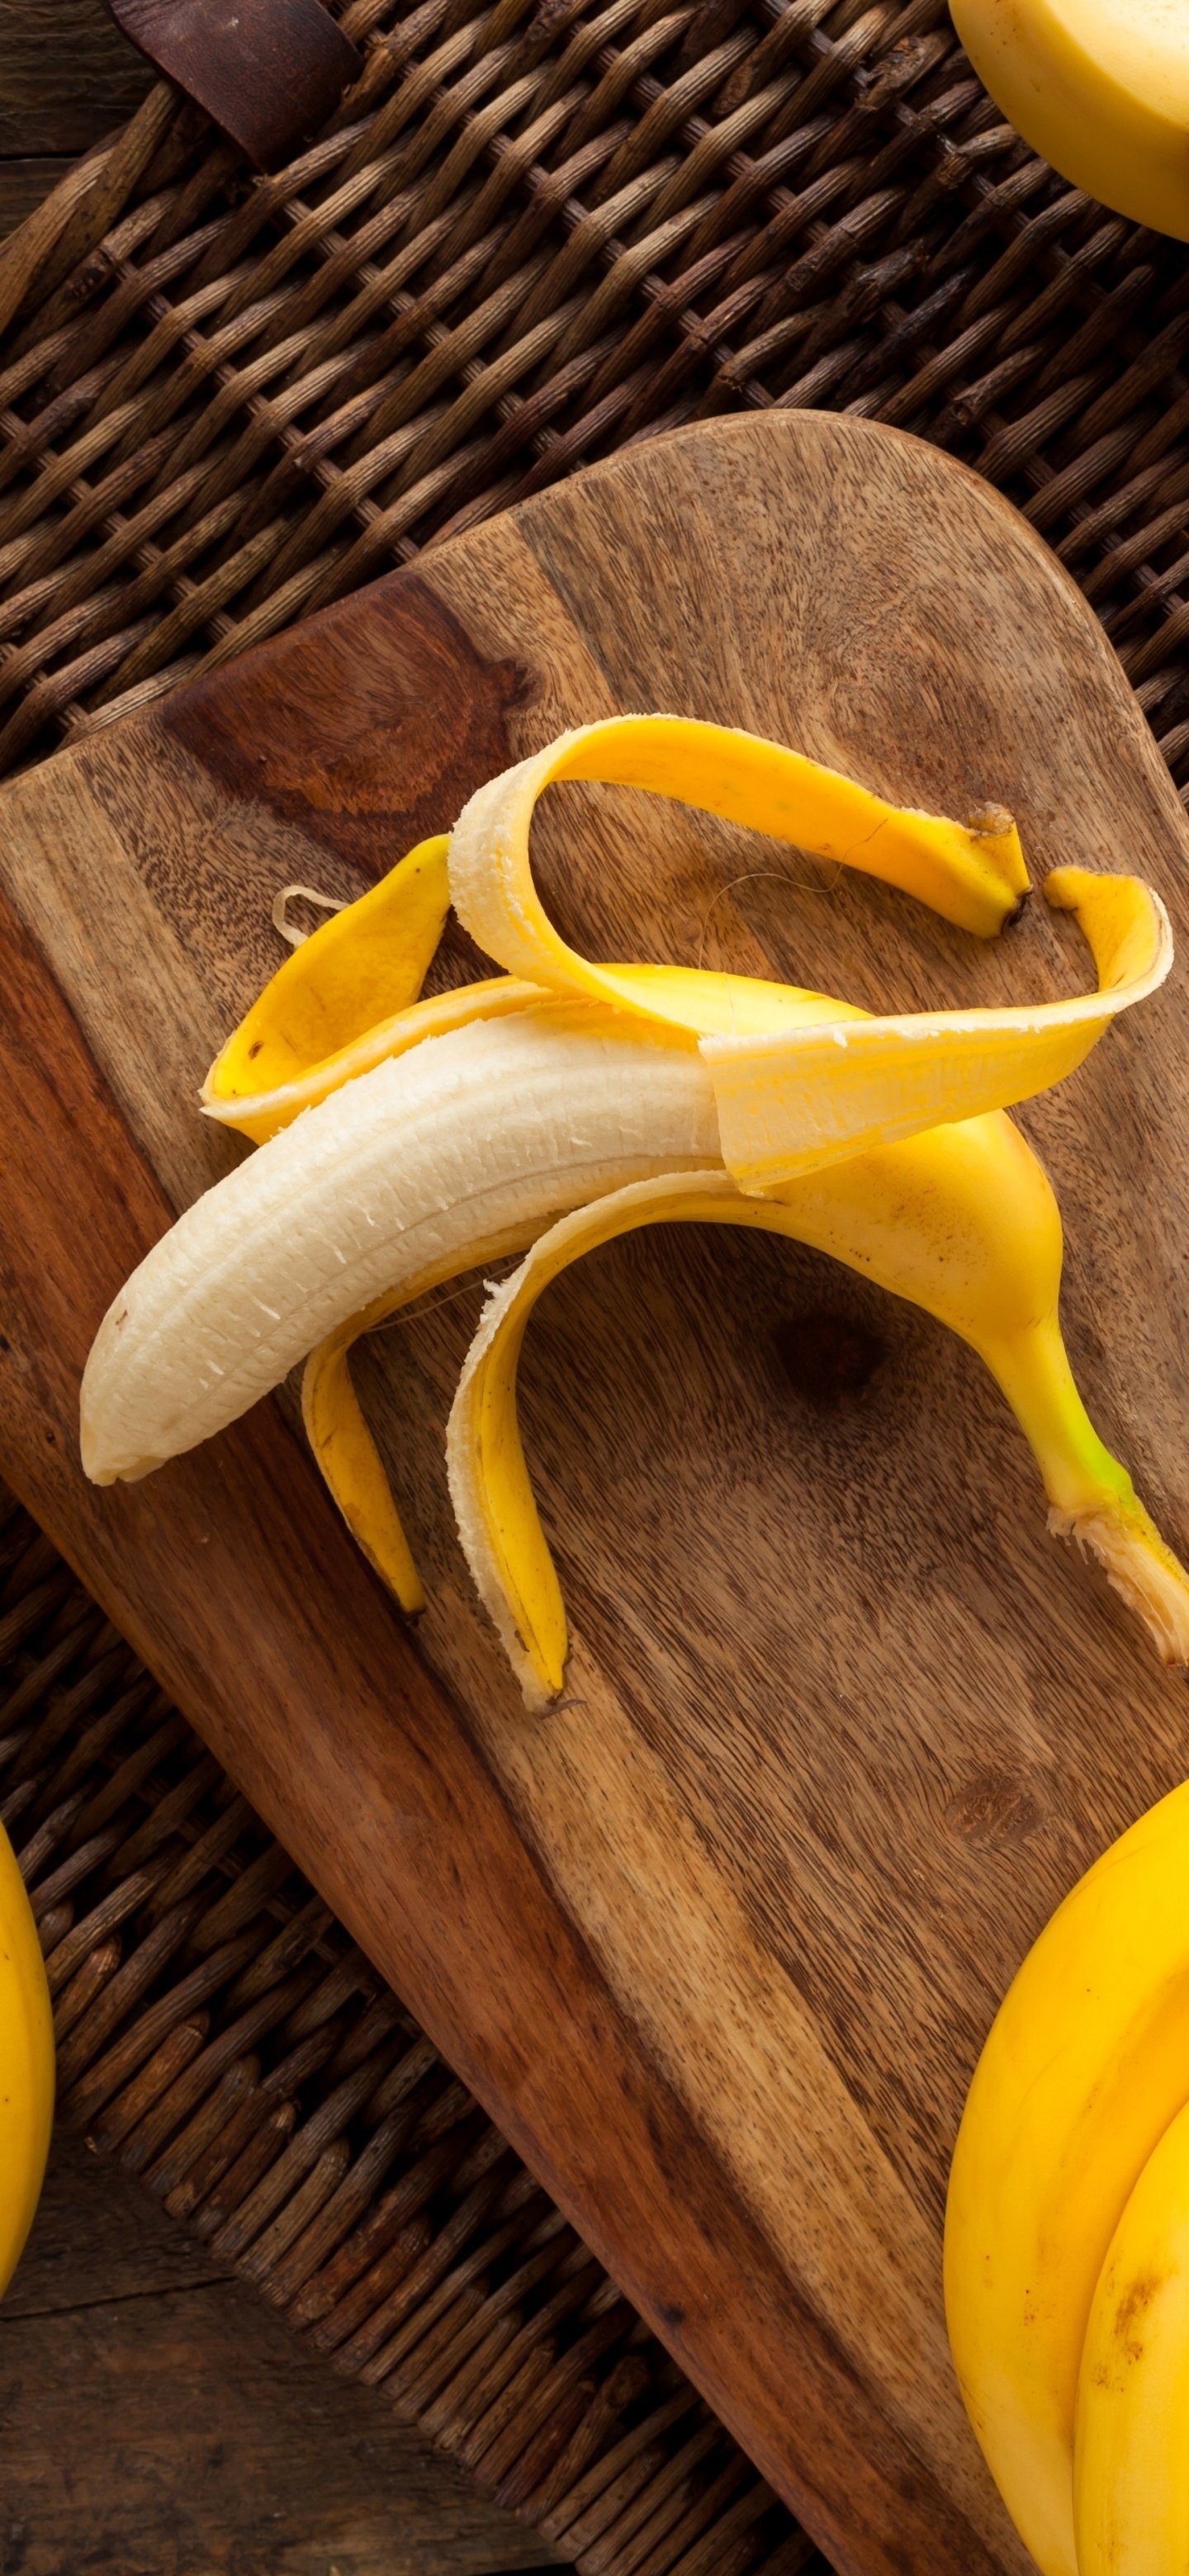 Banana feast, Culinary delight, Nutritious goodness, Finger-licking satisfaction, 1440x3120 HD Handy